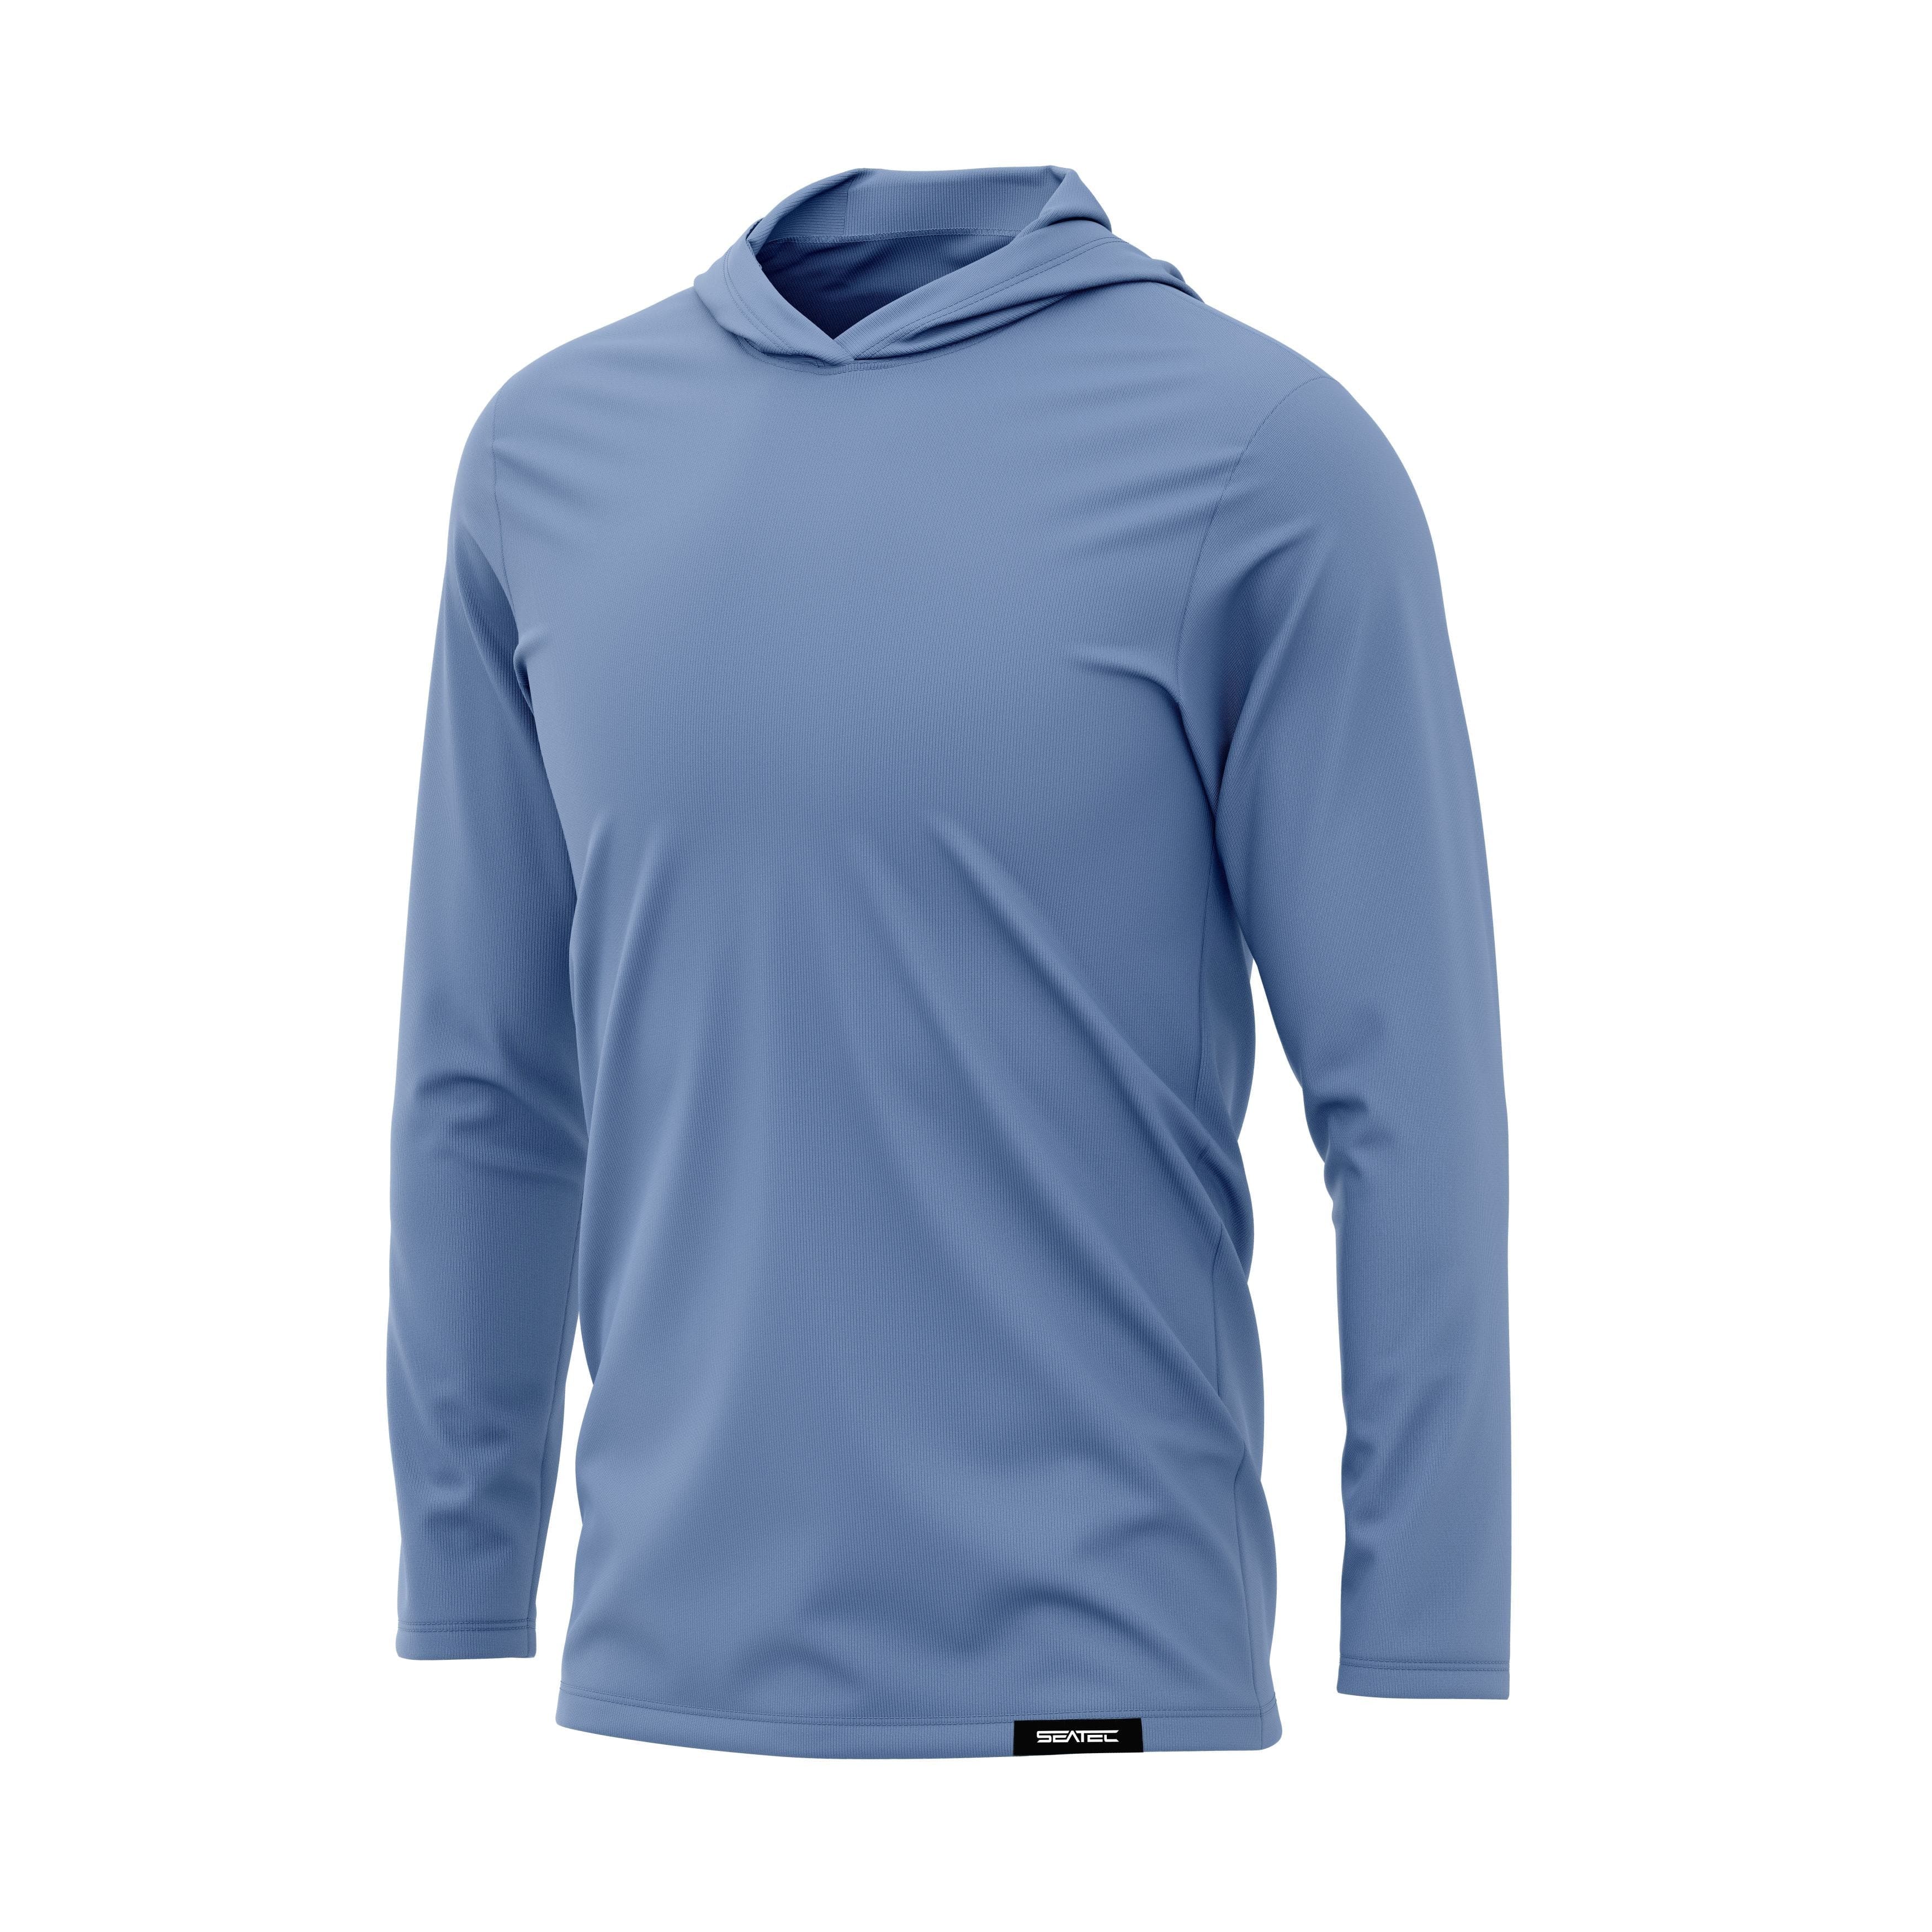 Men's Active | LS Hooded Shirt in Sky Blue | Size XL